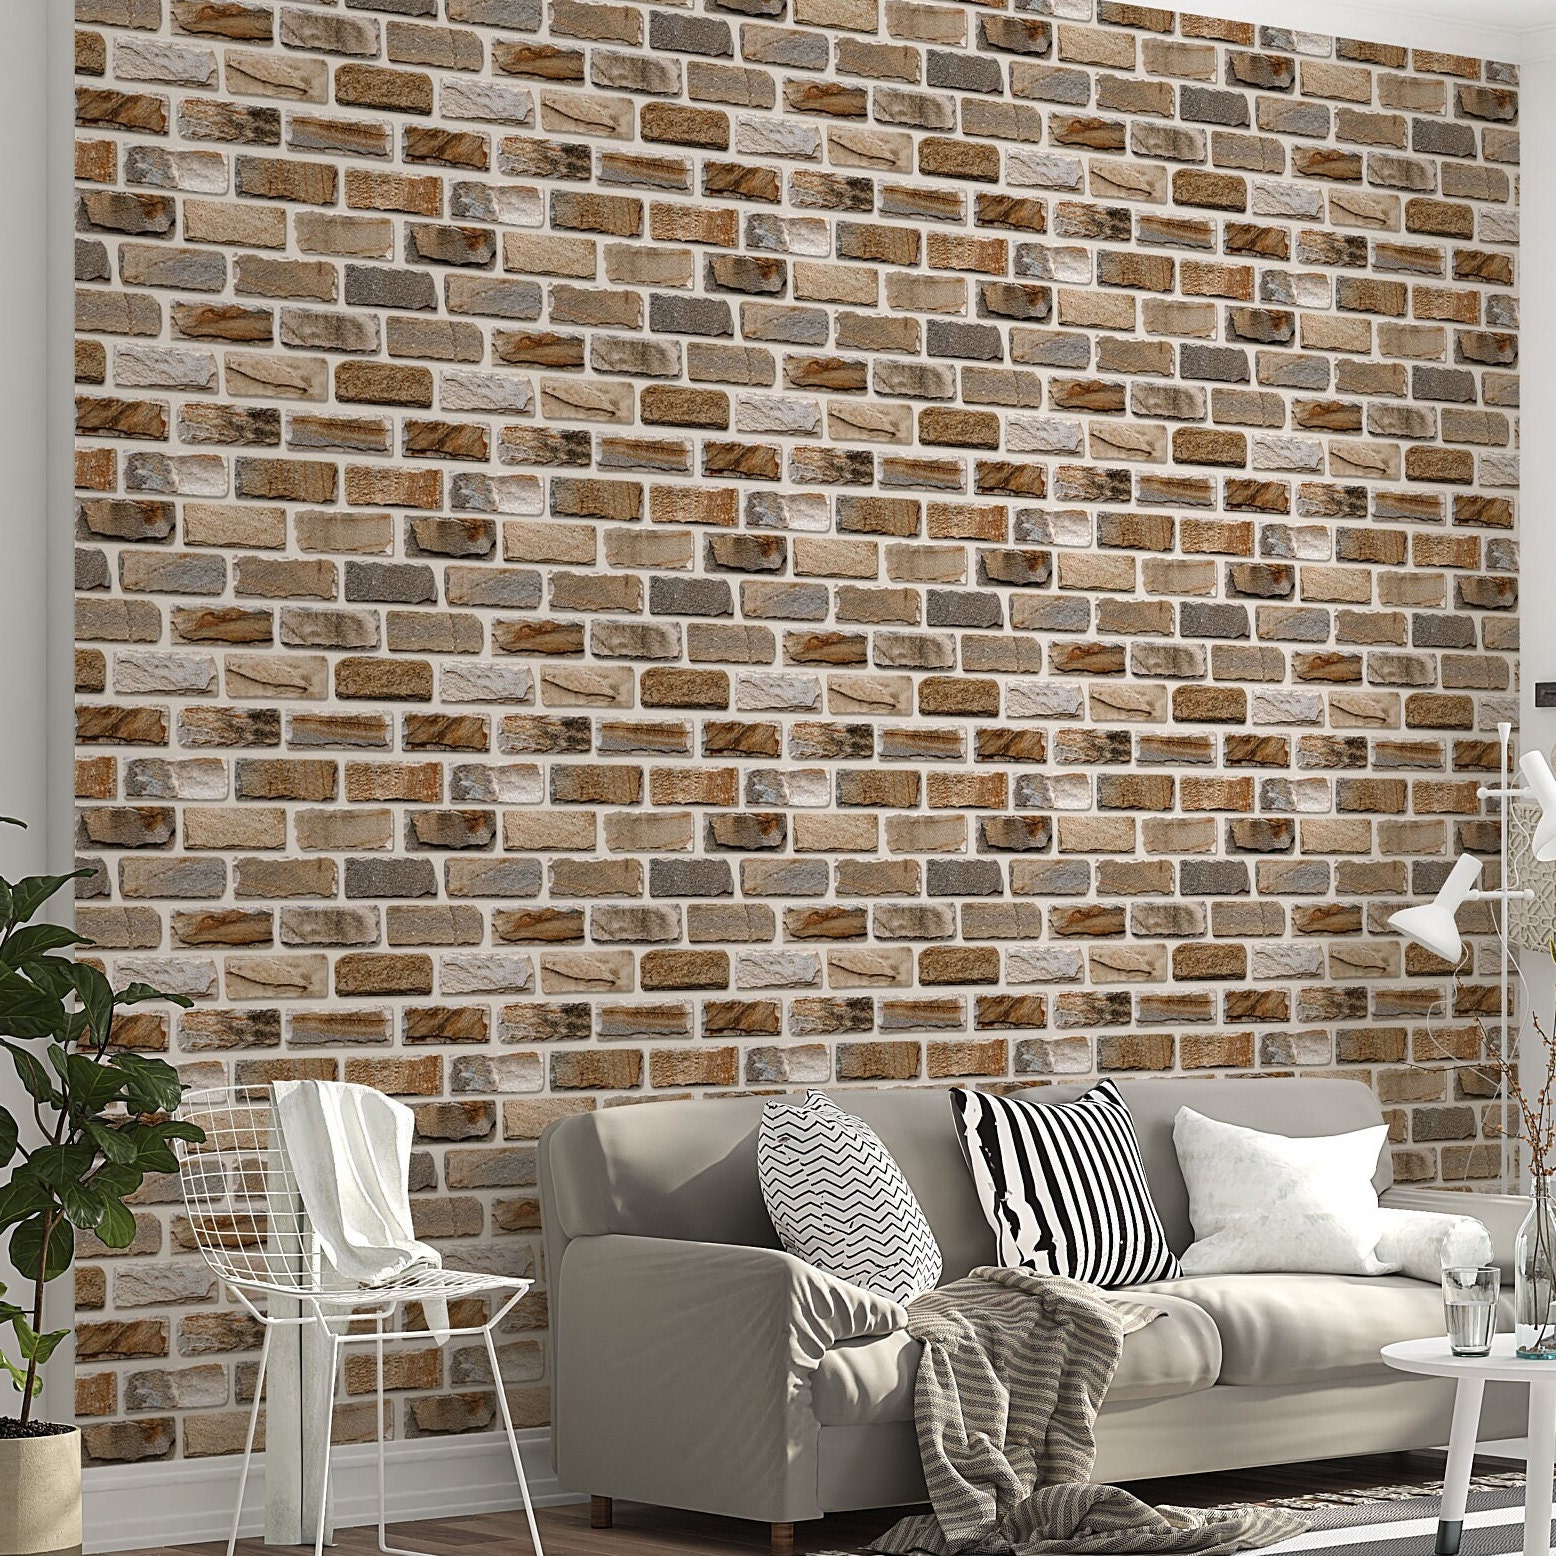 White Brick Peel and Stick Wallpaper  Extra Wide  Thick  Adhesive Stone  Backsplash Prepasted Contact Paper